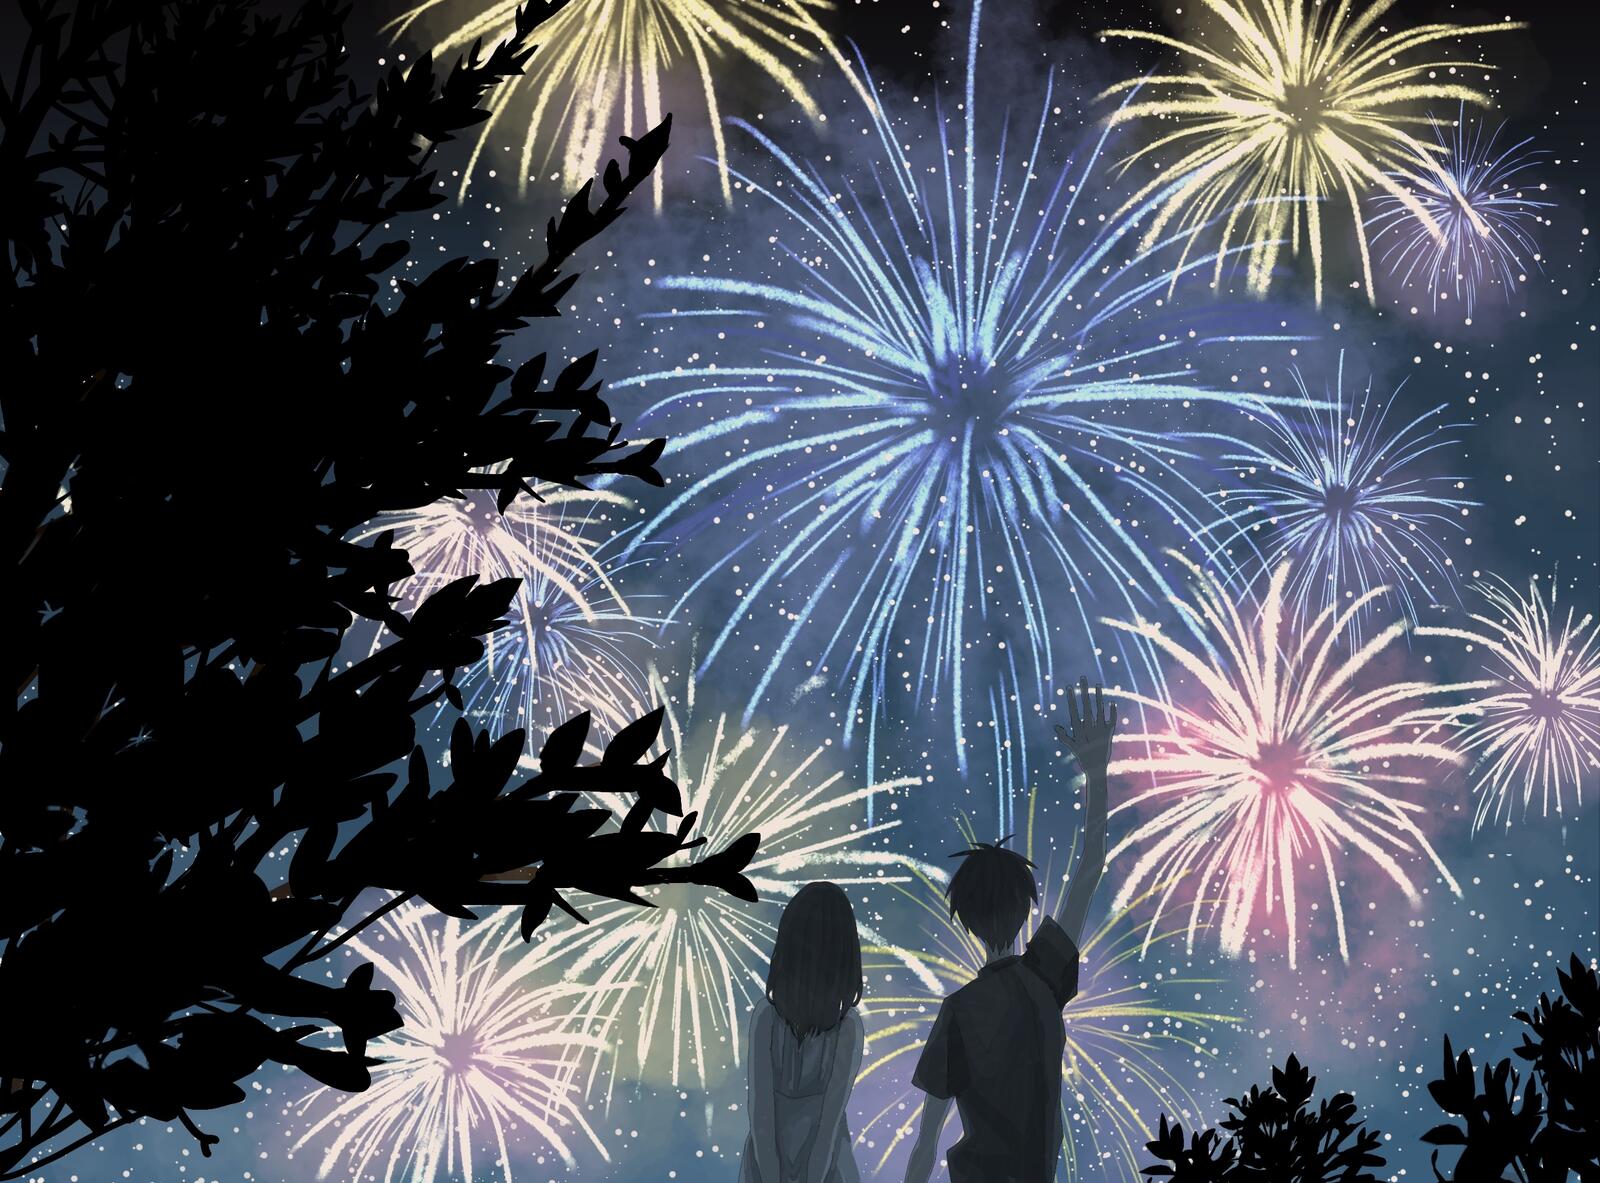 Wallpapers anime couple silhouette fireworks on the desktop